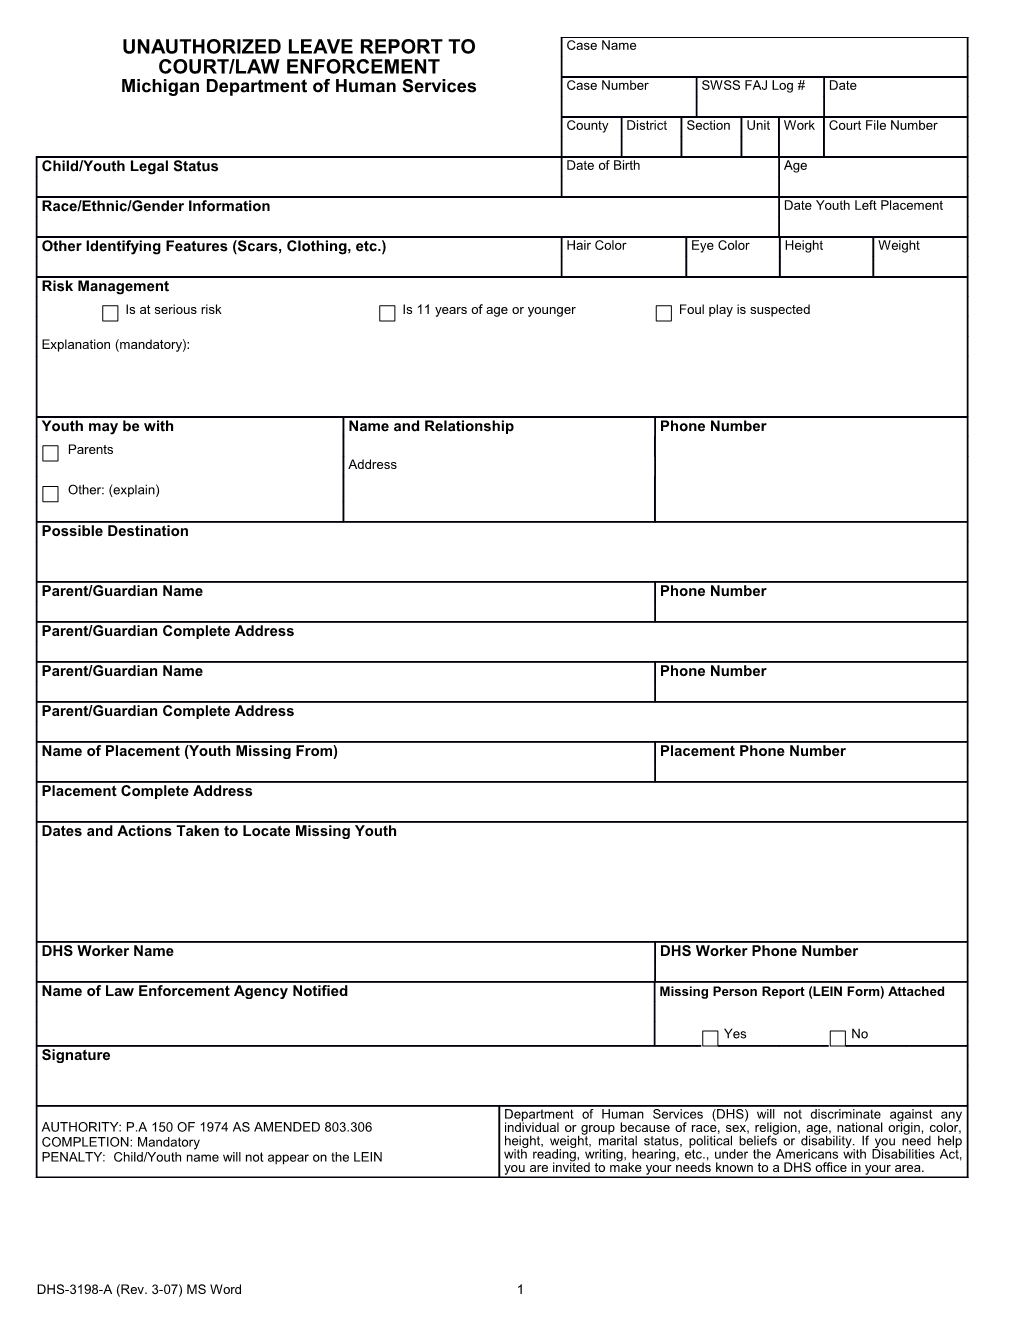 DHS-3198-A, Unauthorized Leave Report to Court/Law Enforcement